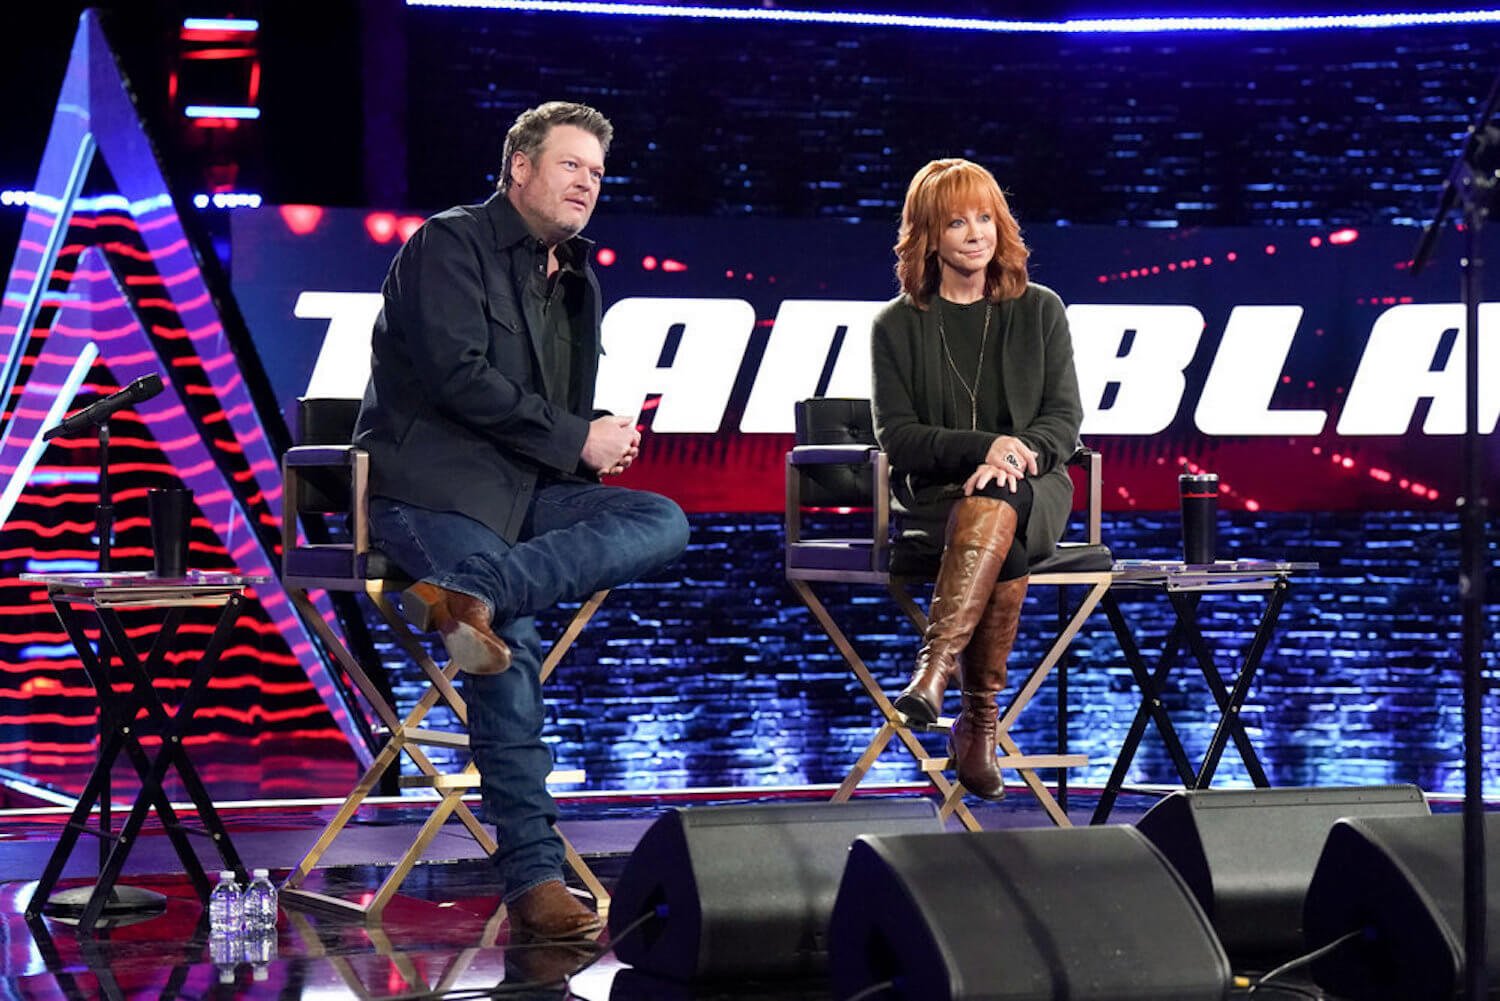 Blake Shelton and Reba McEntire sitting on stage in 'The Voice' Season 23